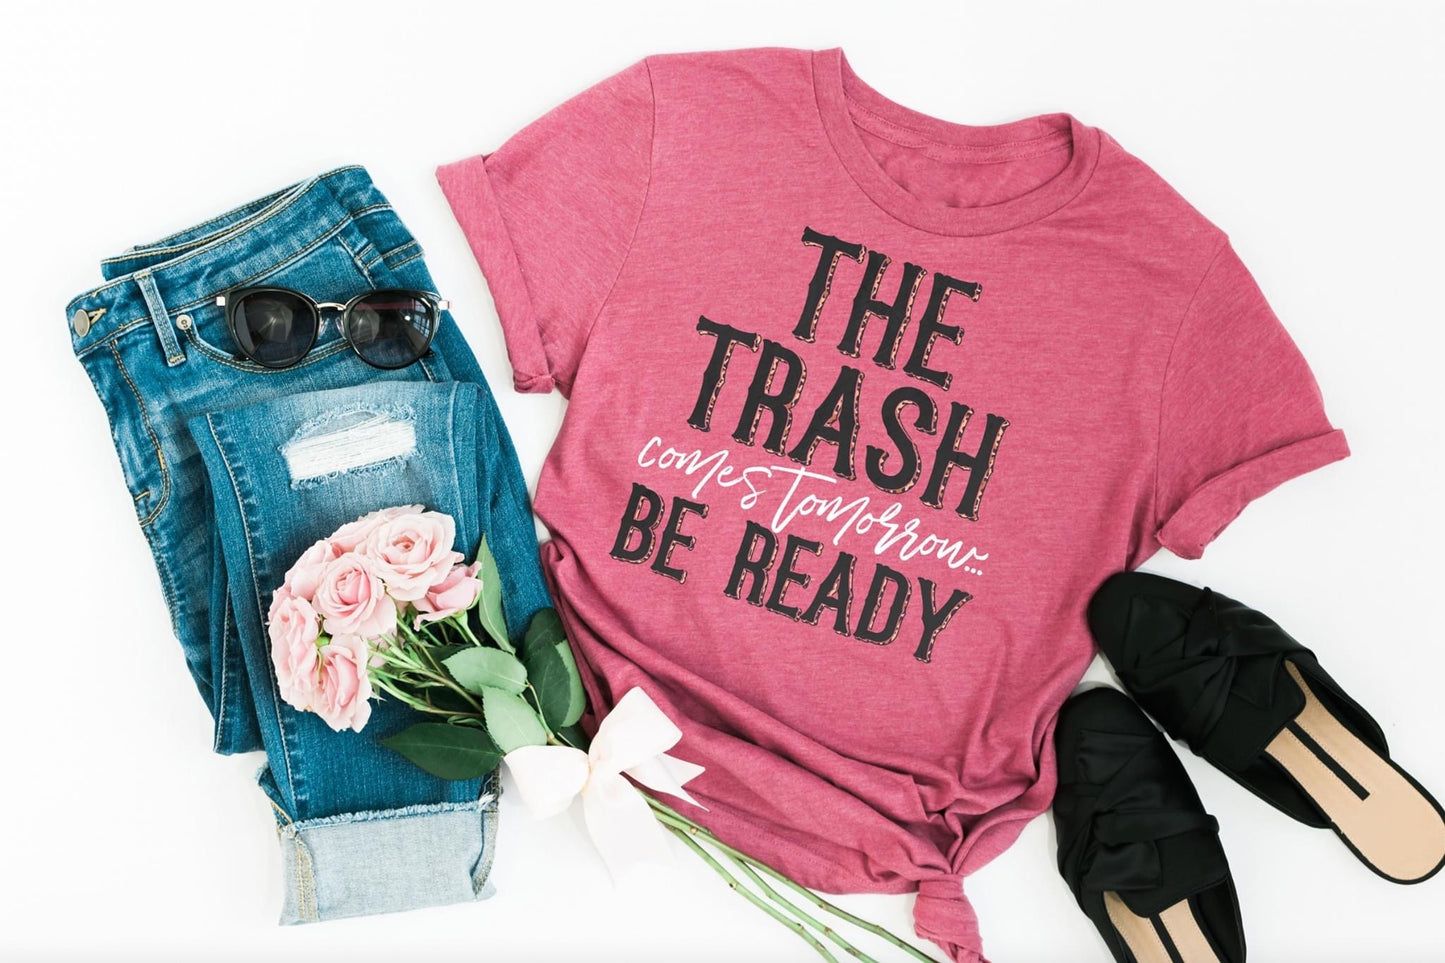 PREORDER - The Trash Comes Tomorrow Soft Boutique Tee